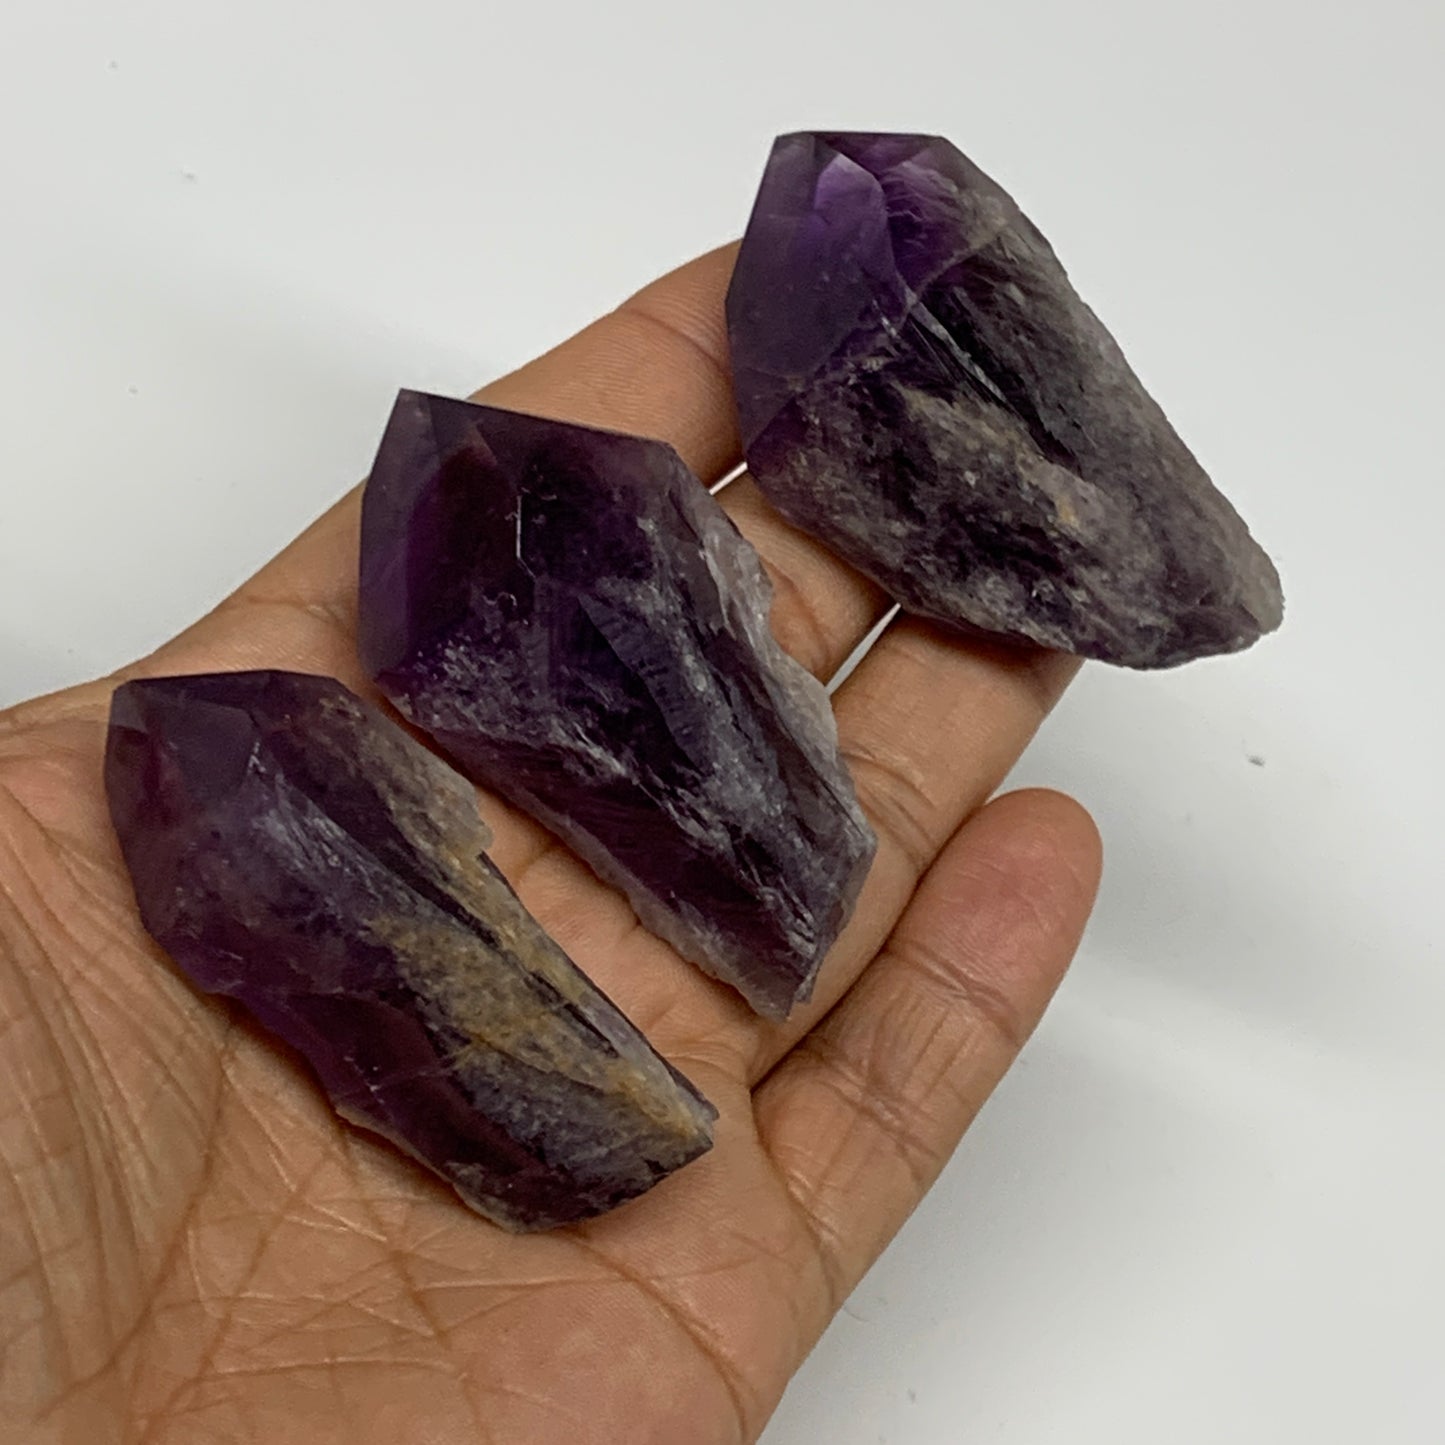 129.9g, 2.2" - 2.3", 3pcs, Amethyst Point Polished Rough lower part, B32400